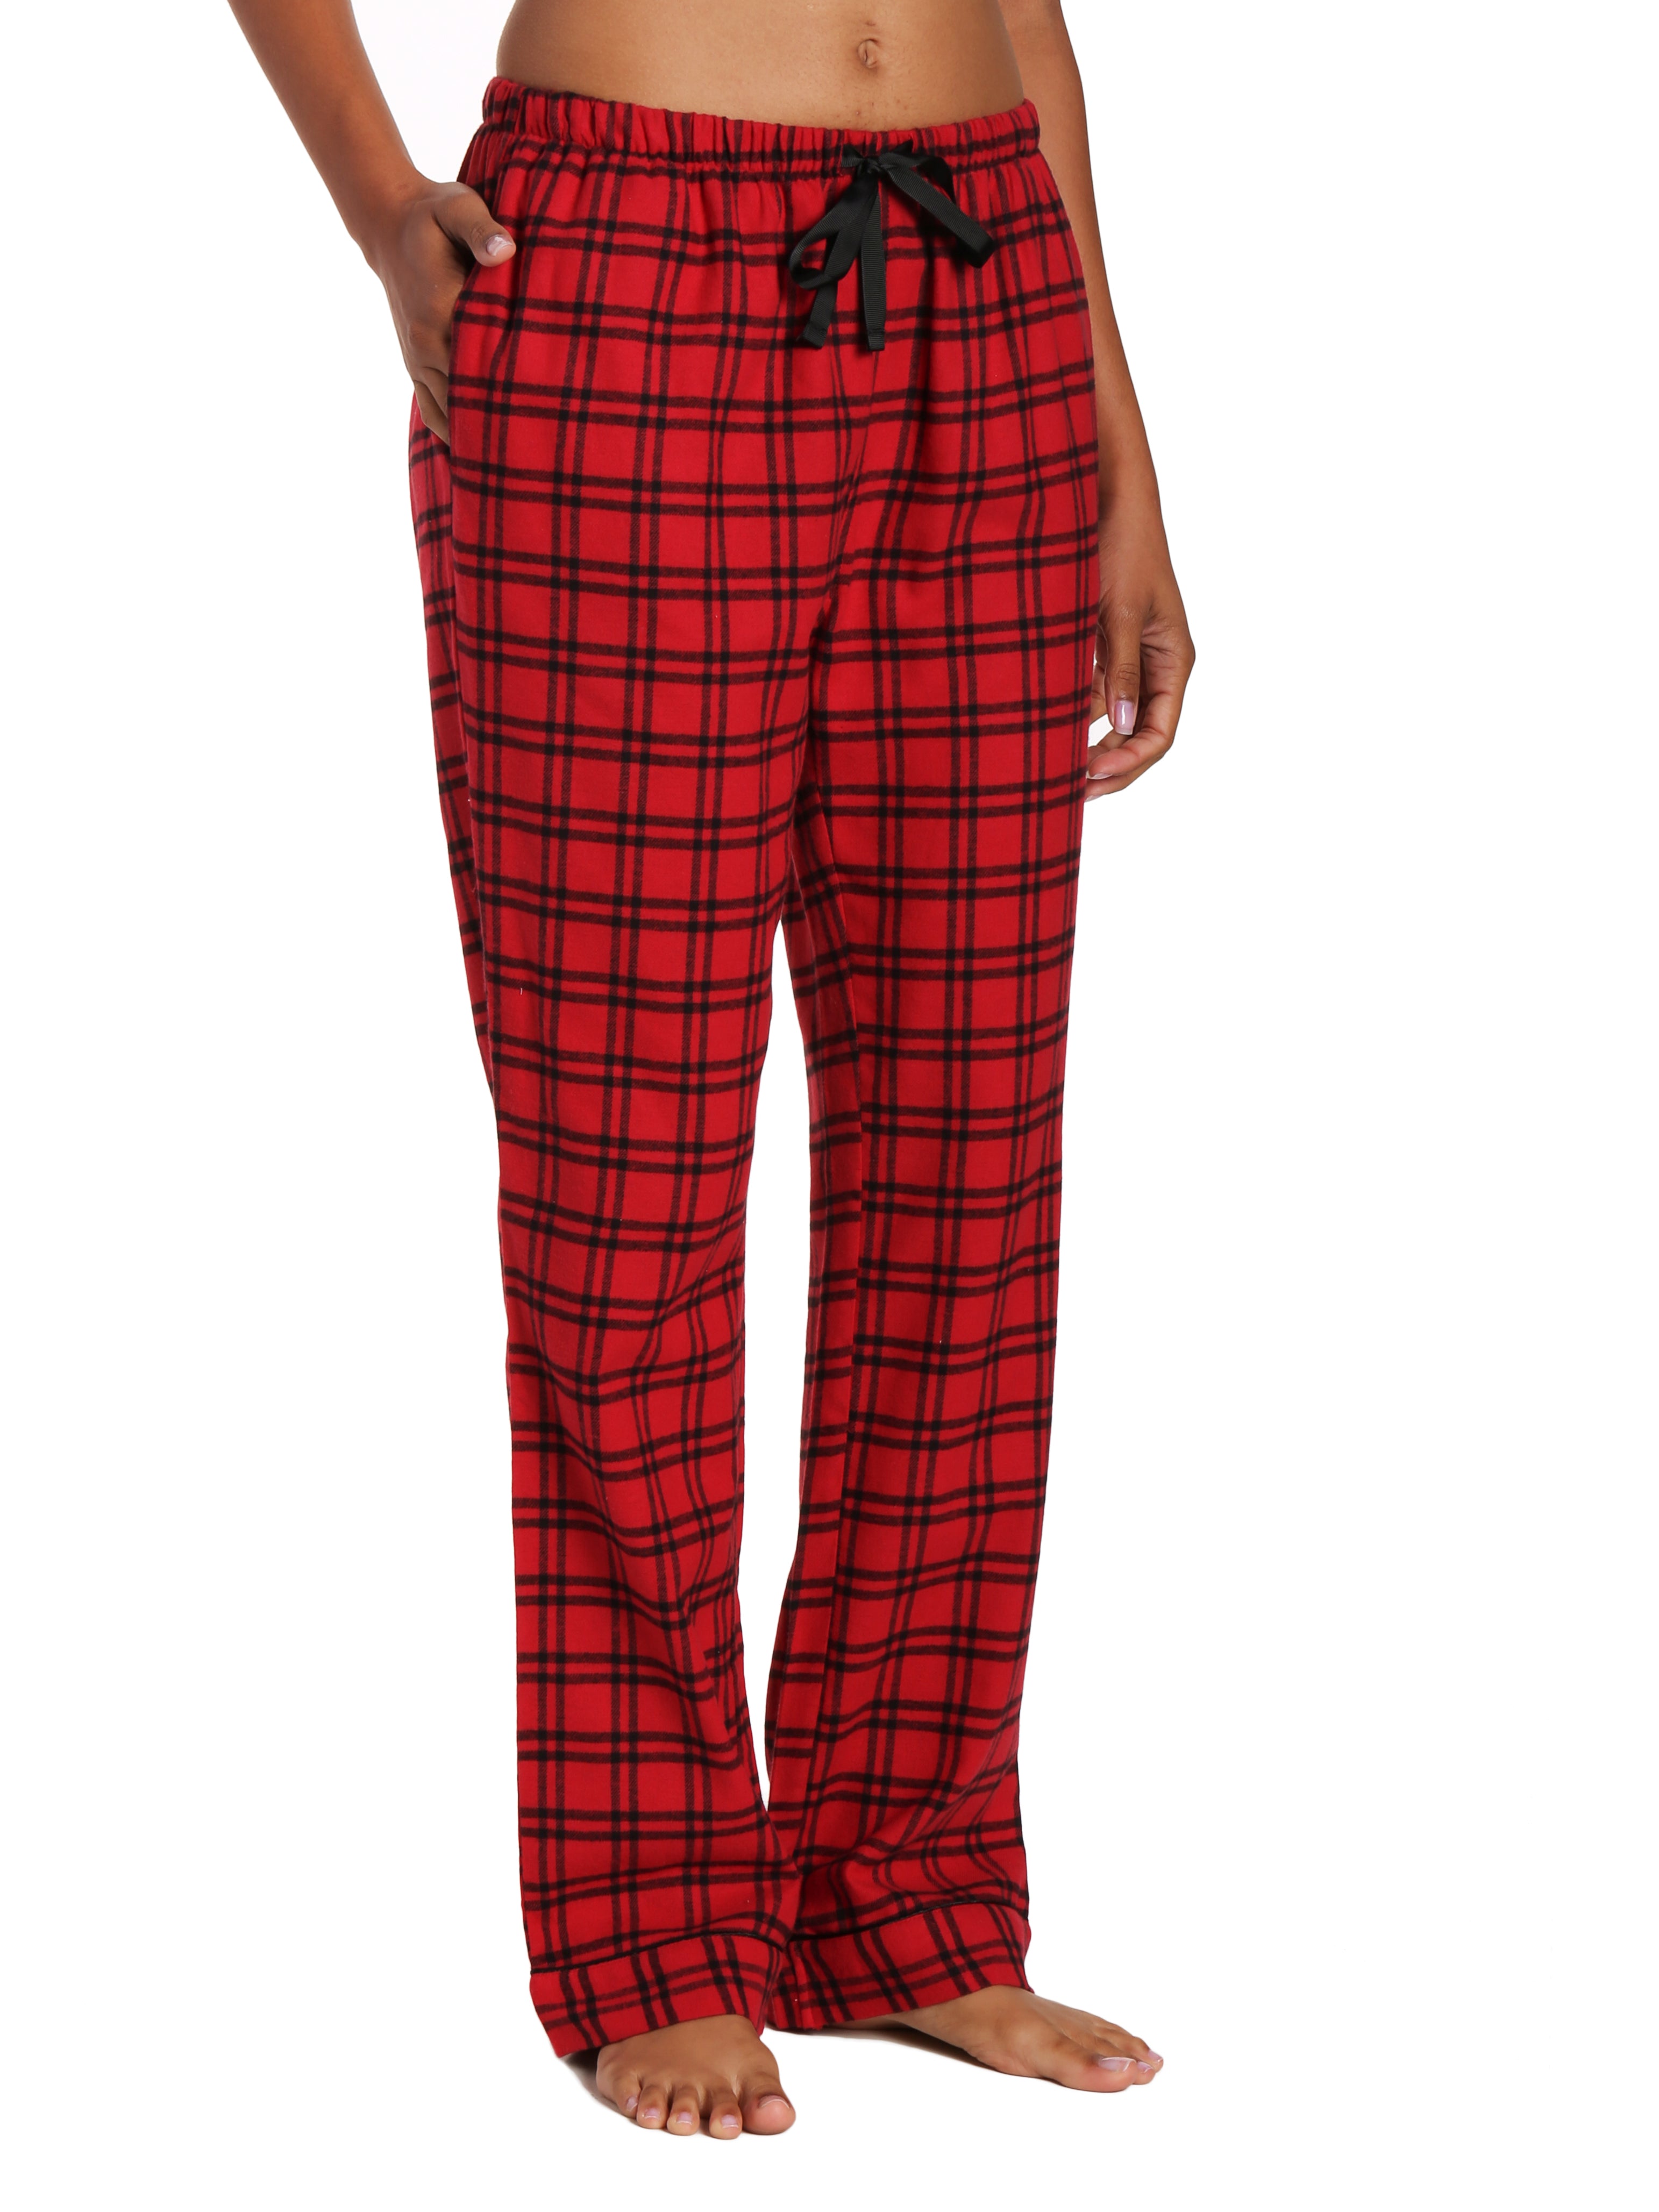 Womens 100% Cotton Lightweight Flannel Lounge Pants - Checks Red-Black ...